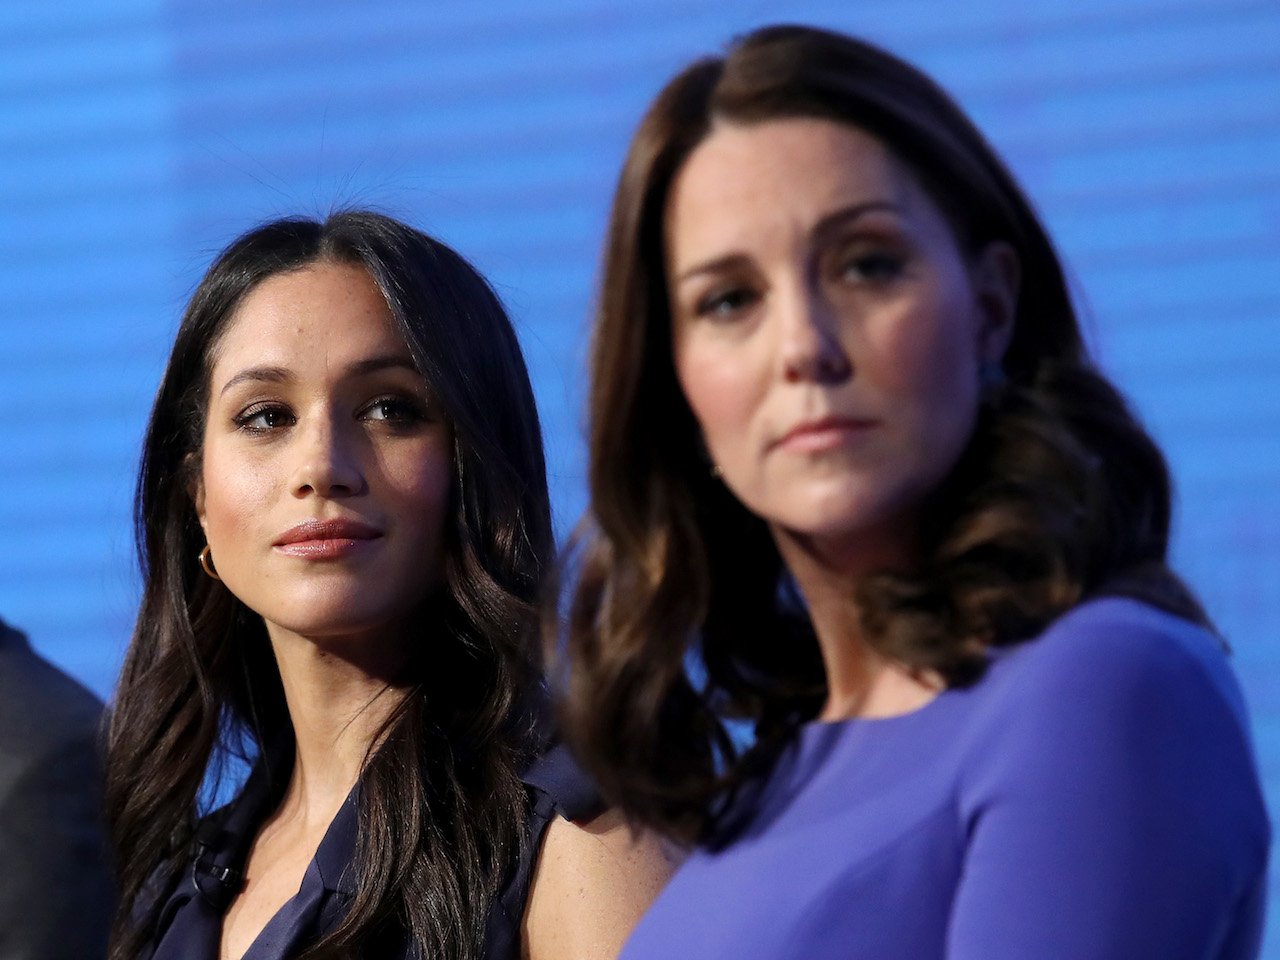 Meghan Markle and Kate Middleton: are they feuding?